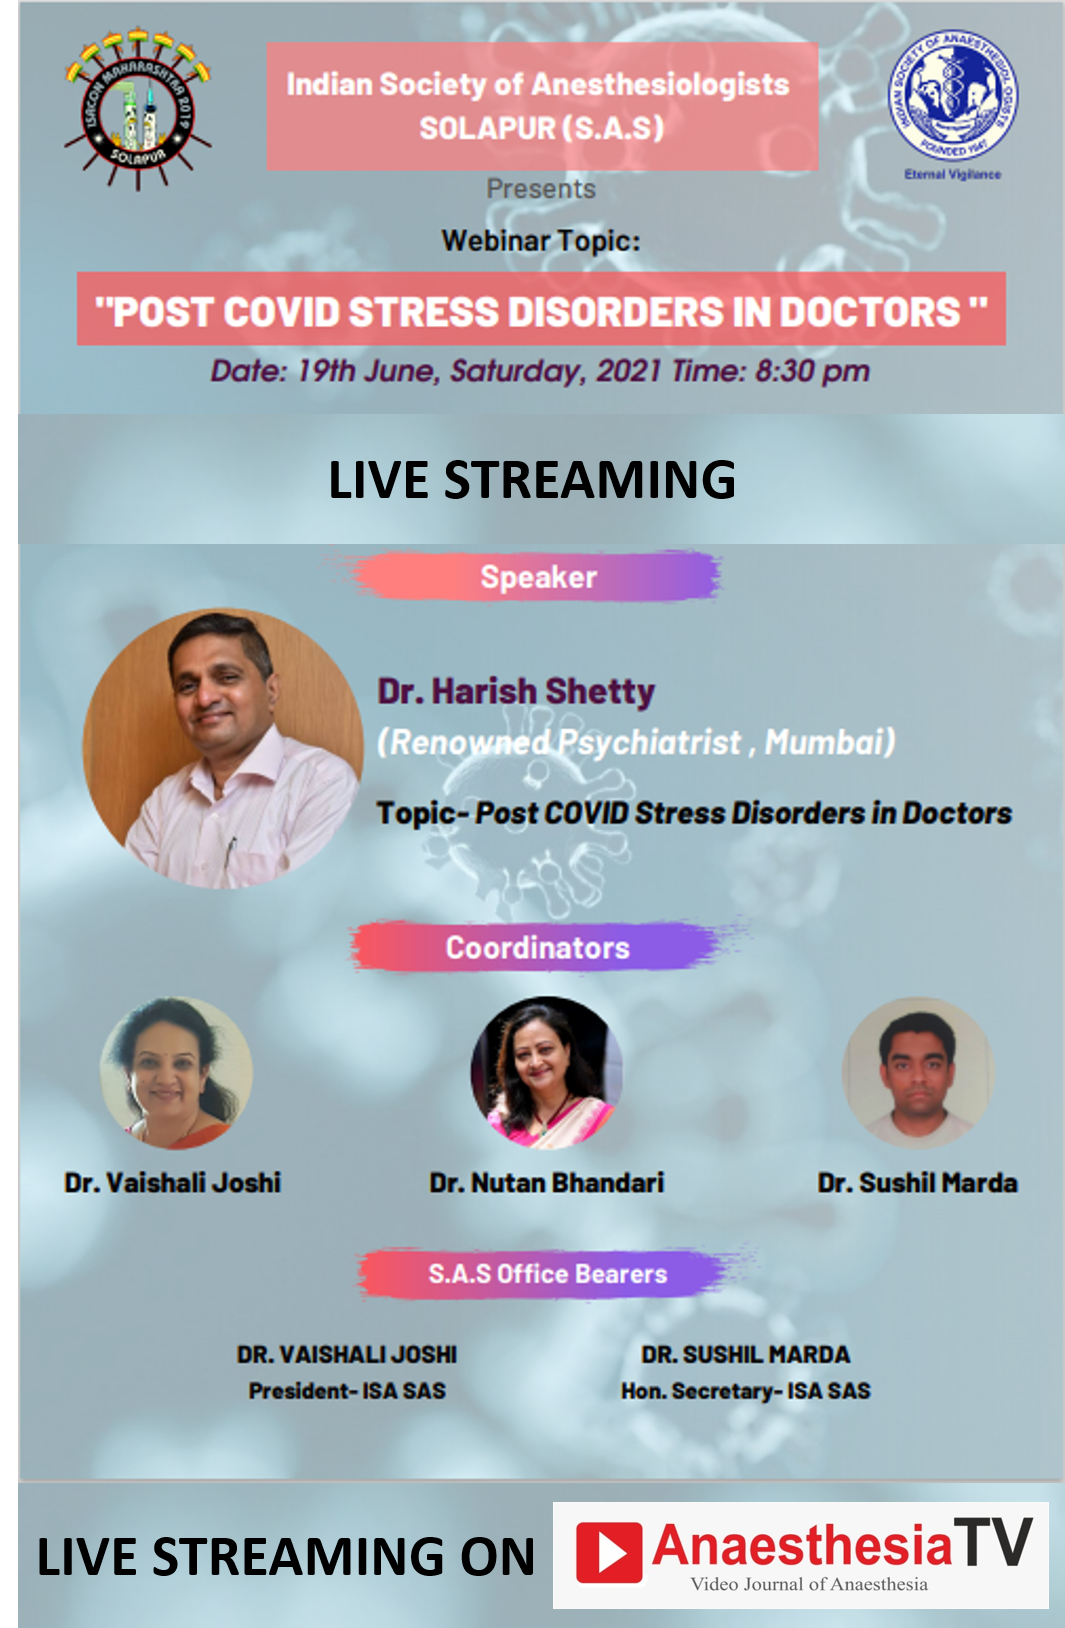 “POST COVID STRESS DISORDERS IN DOCTORS”